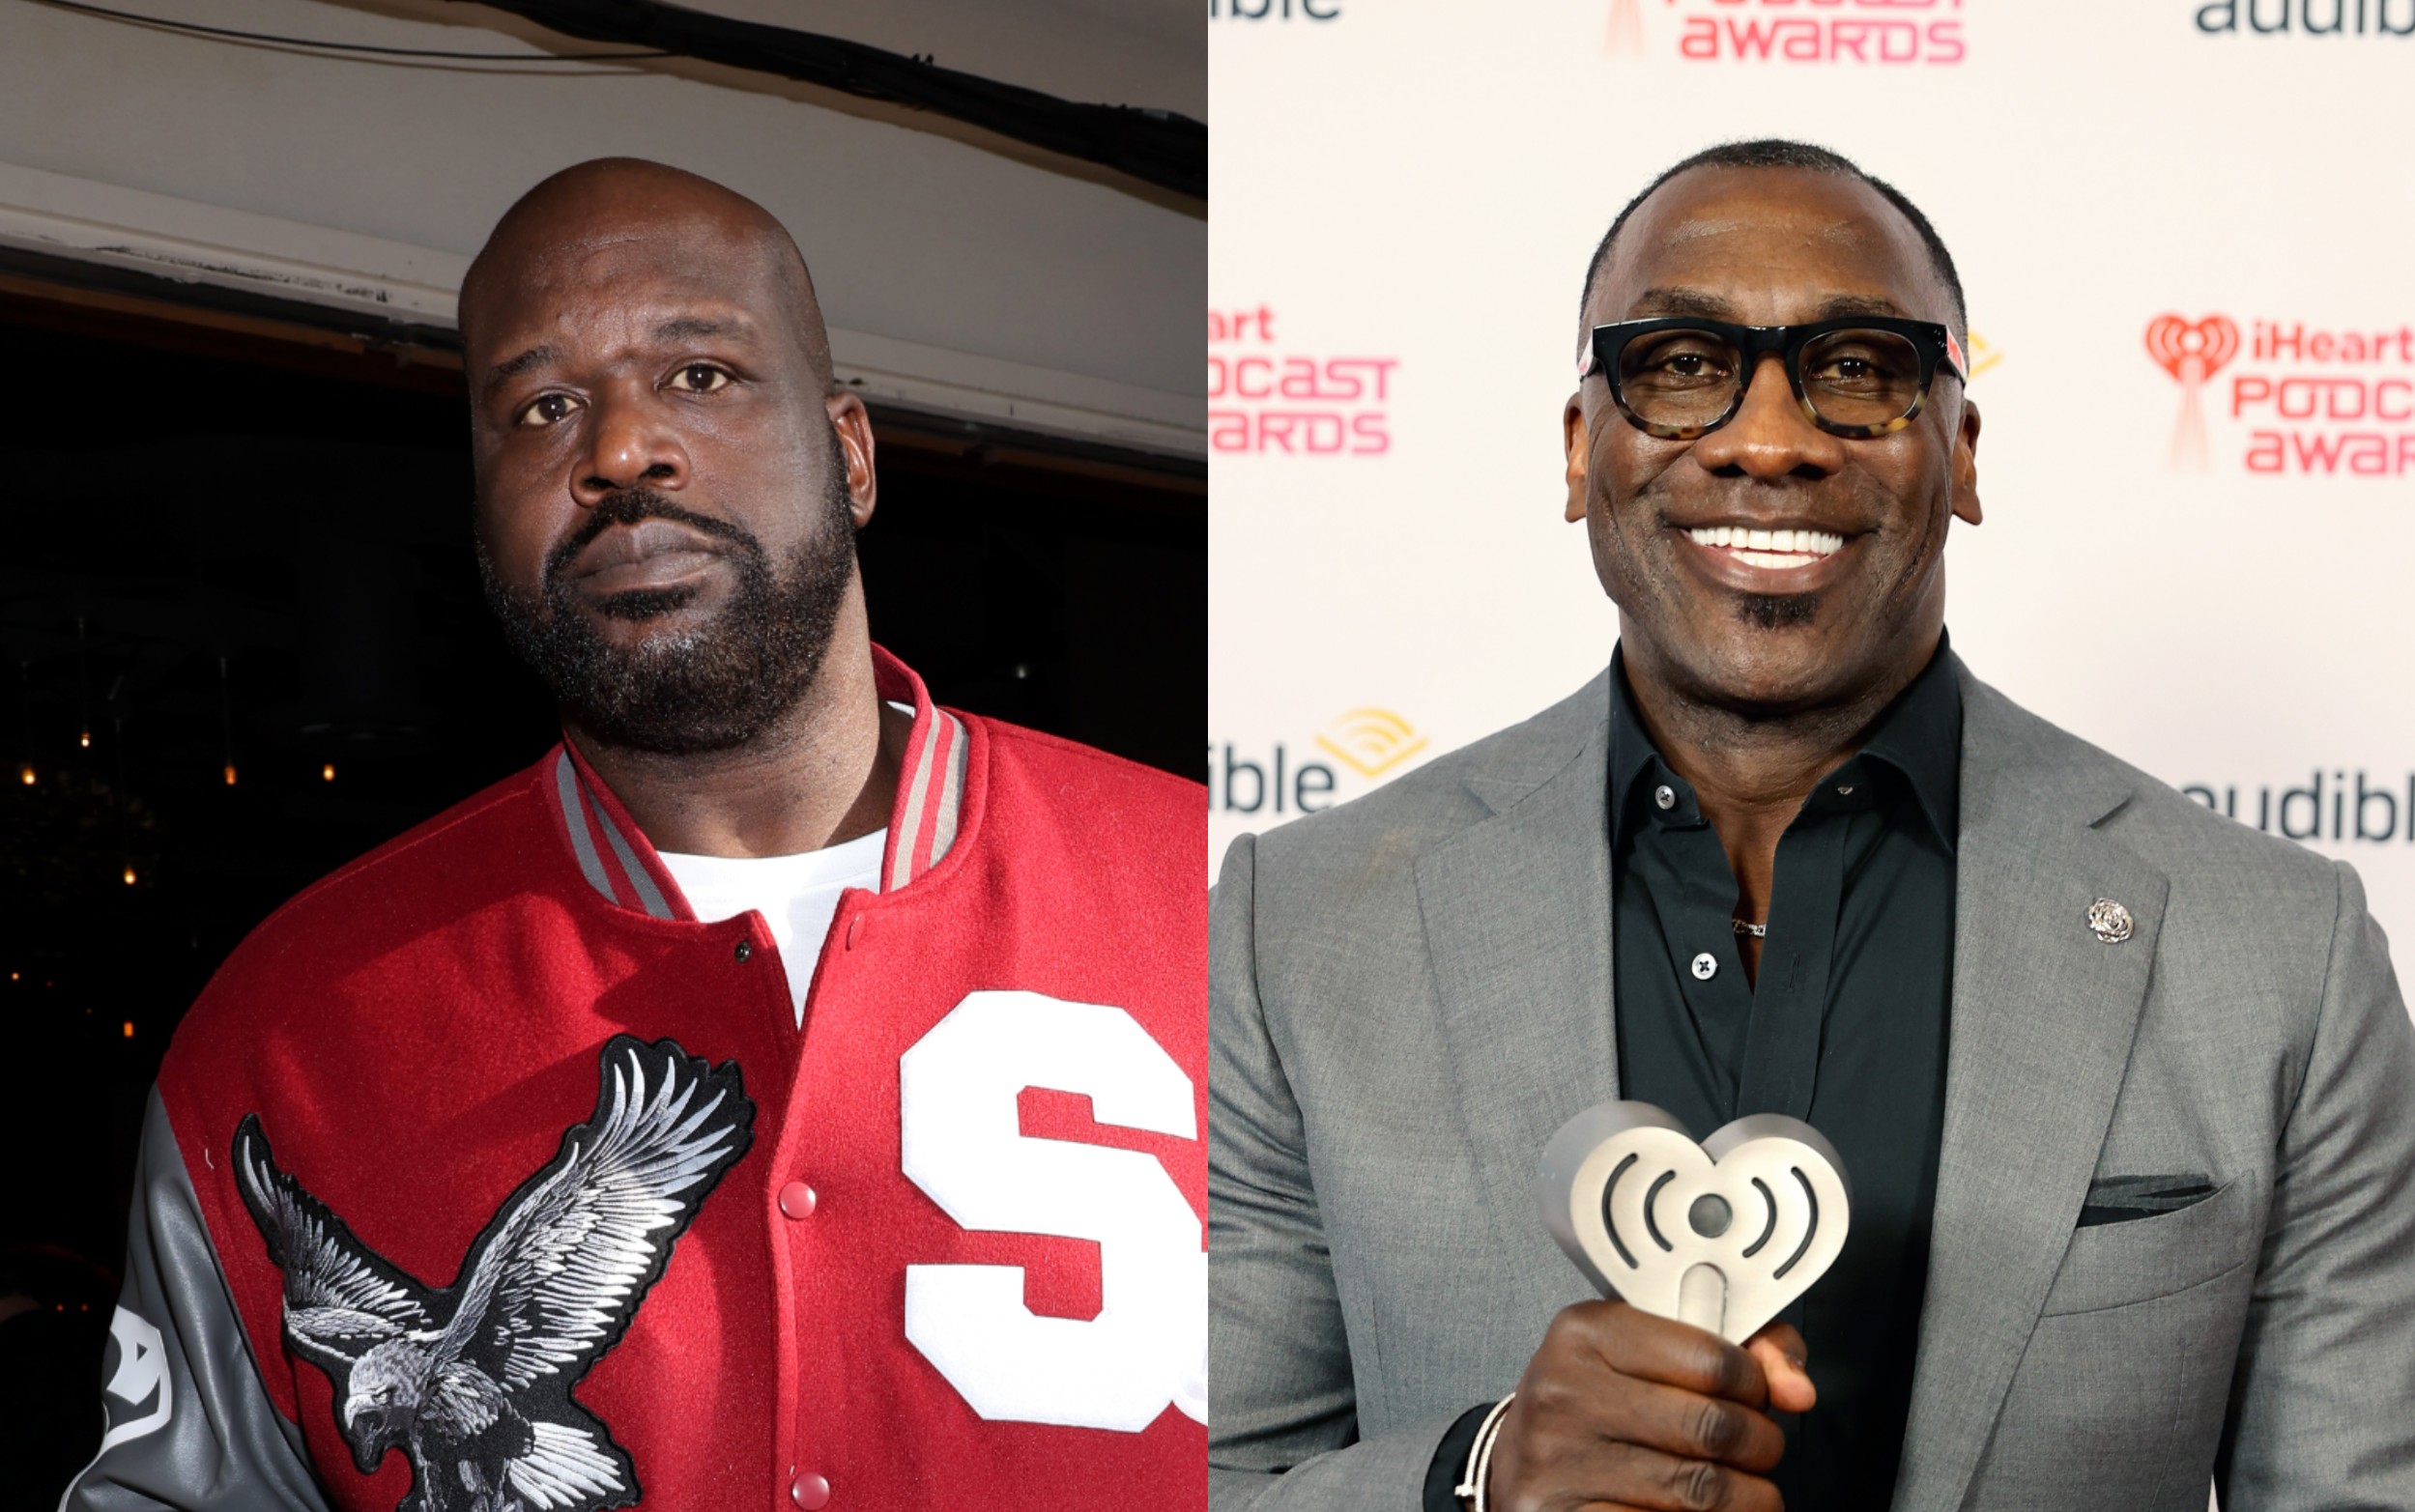 Unc vs. Unc: Shaquille O’Neal Drops Diss Track For Shannon Sharpe